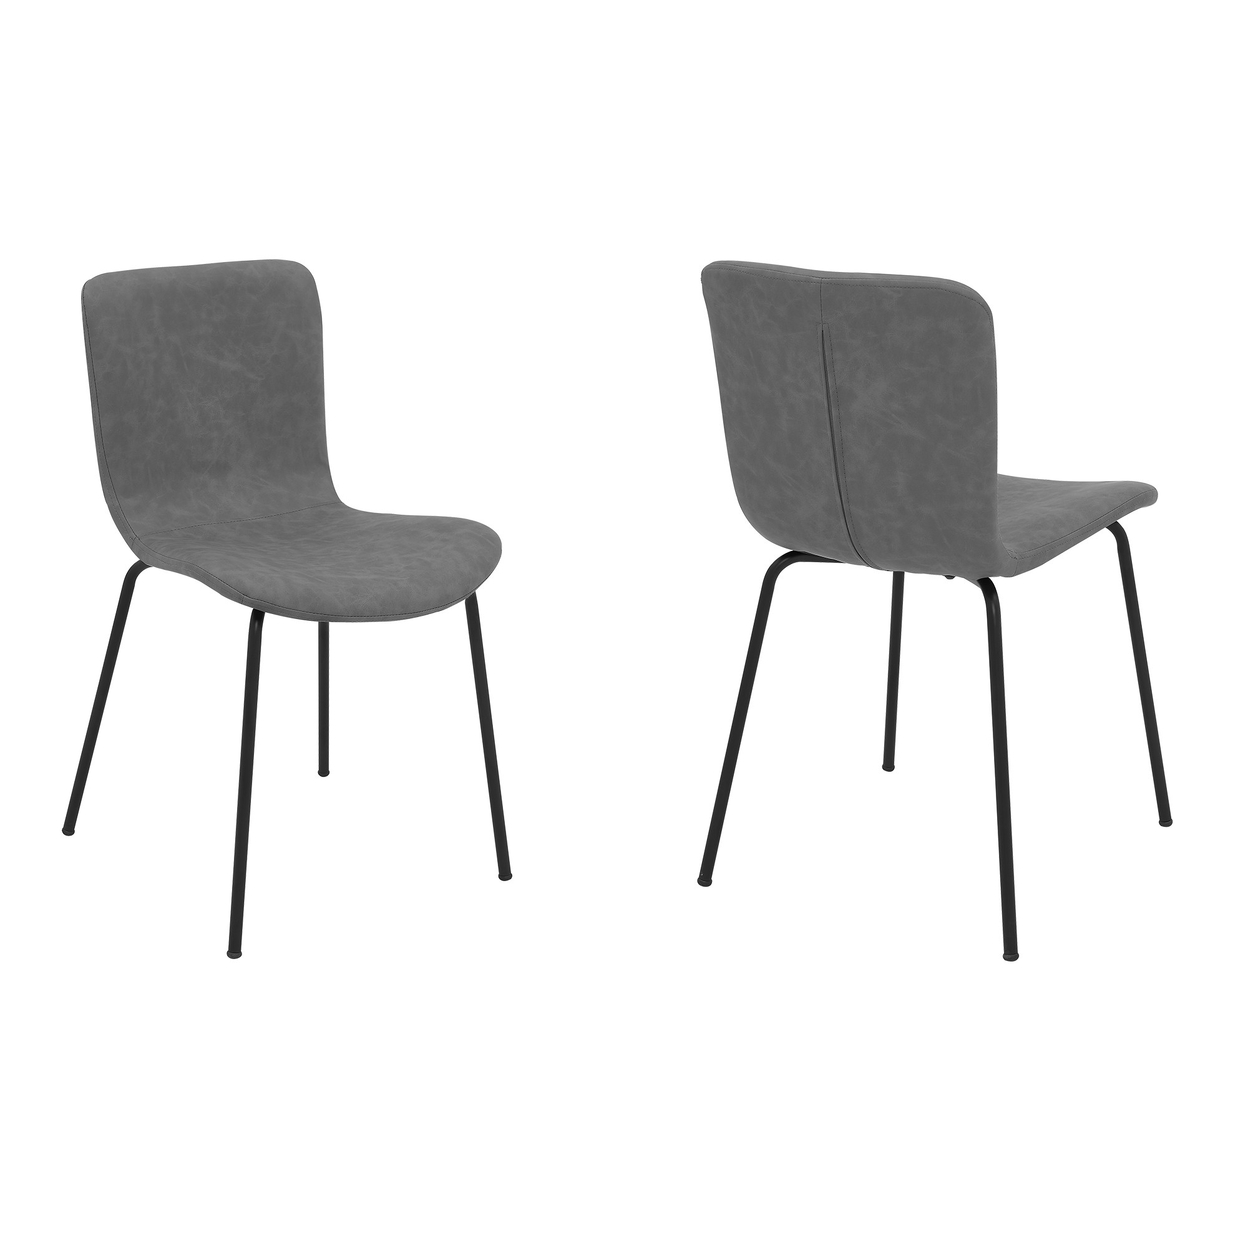 Metal And Fabric Dining Chair, Set Of 2, Gray And Black- Saltoro Sherpi